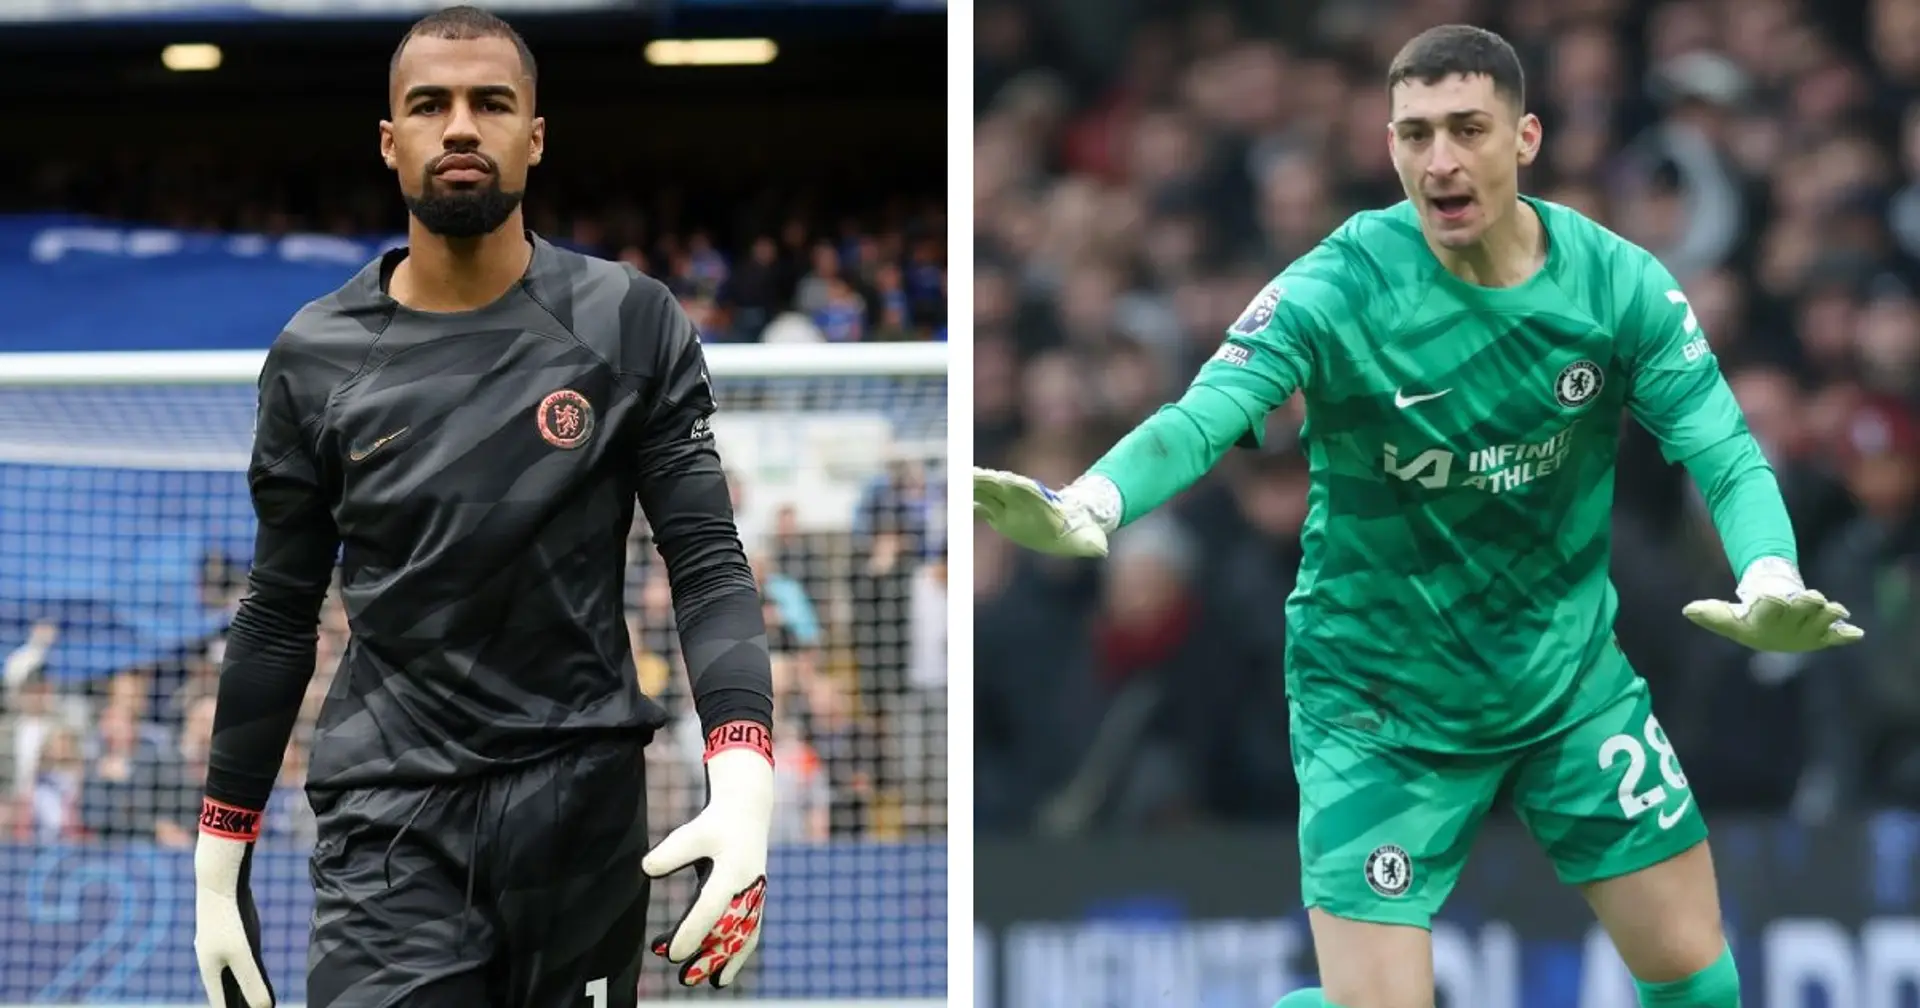 Chelsea told 'neither Sanchez nor Petrovic are good enough' and should be replaced by rival goalkeeper